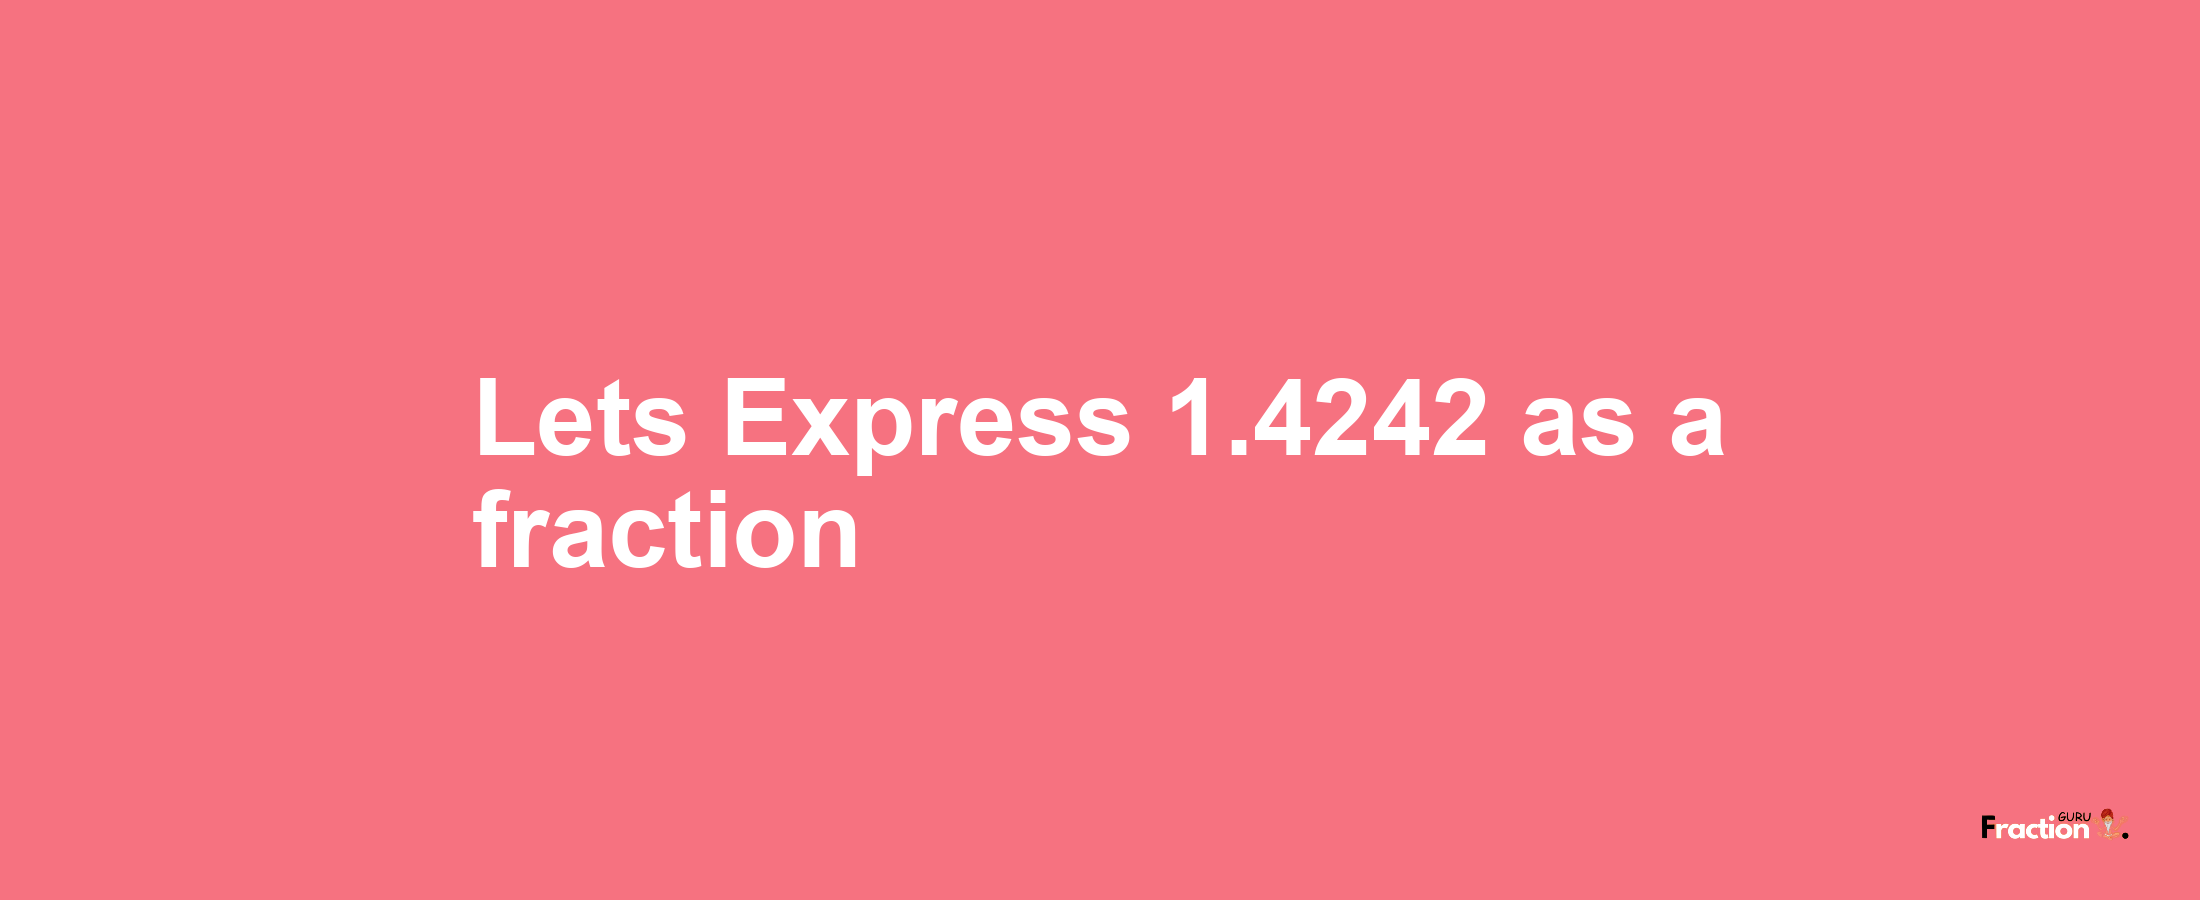 Lets Express 1.4242 as afraction